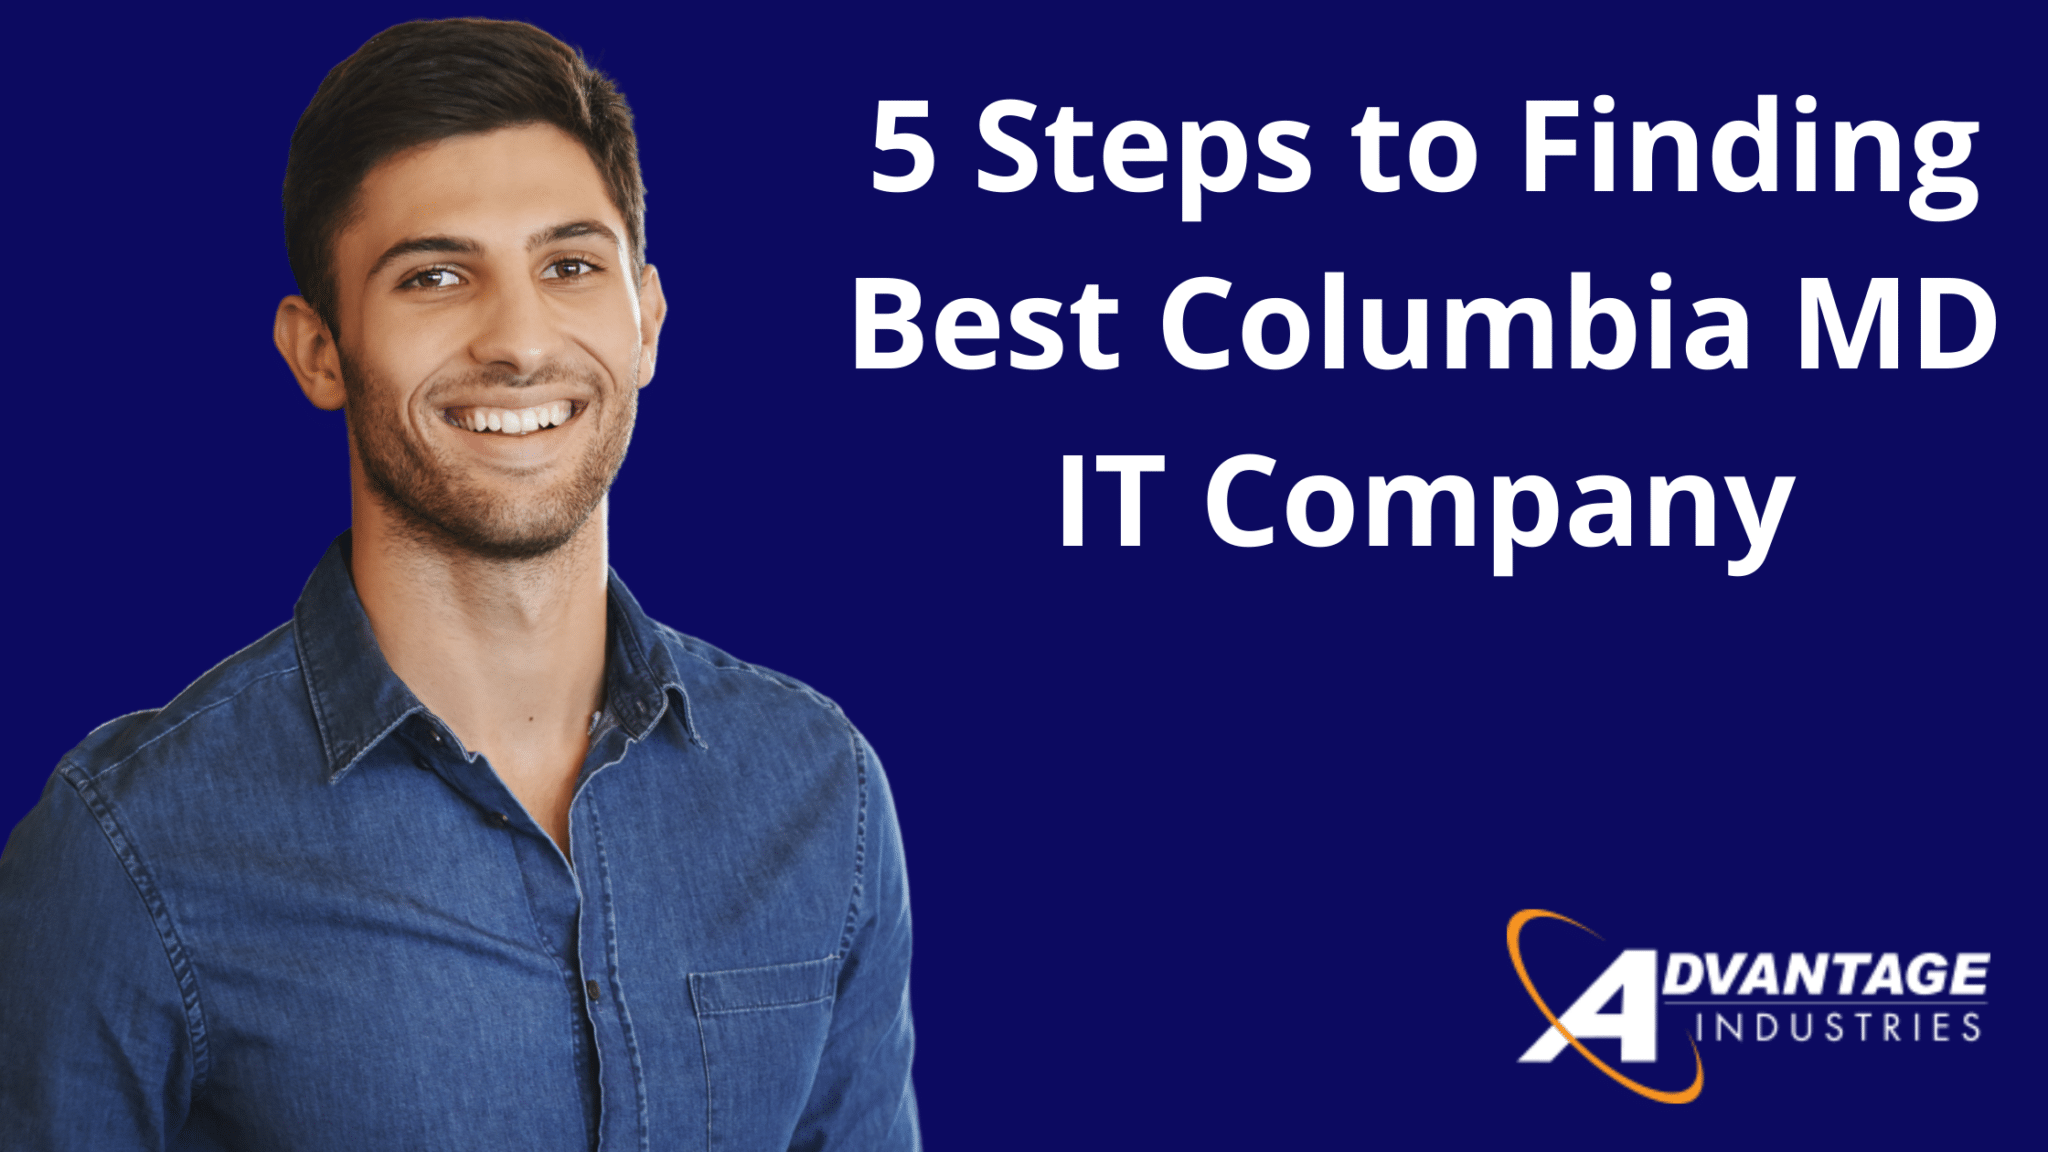 5 Steps to Finding Best Columbia MD IT Company